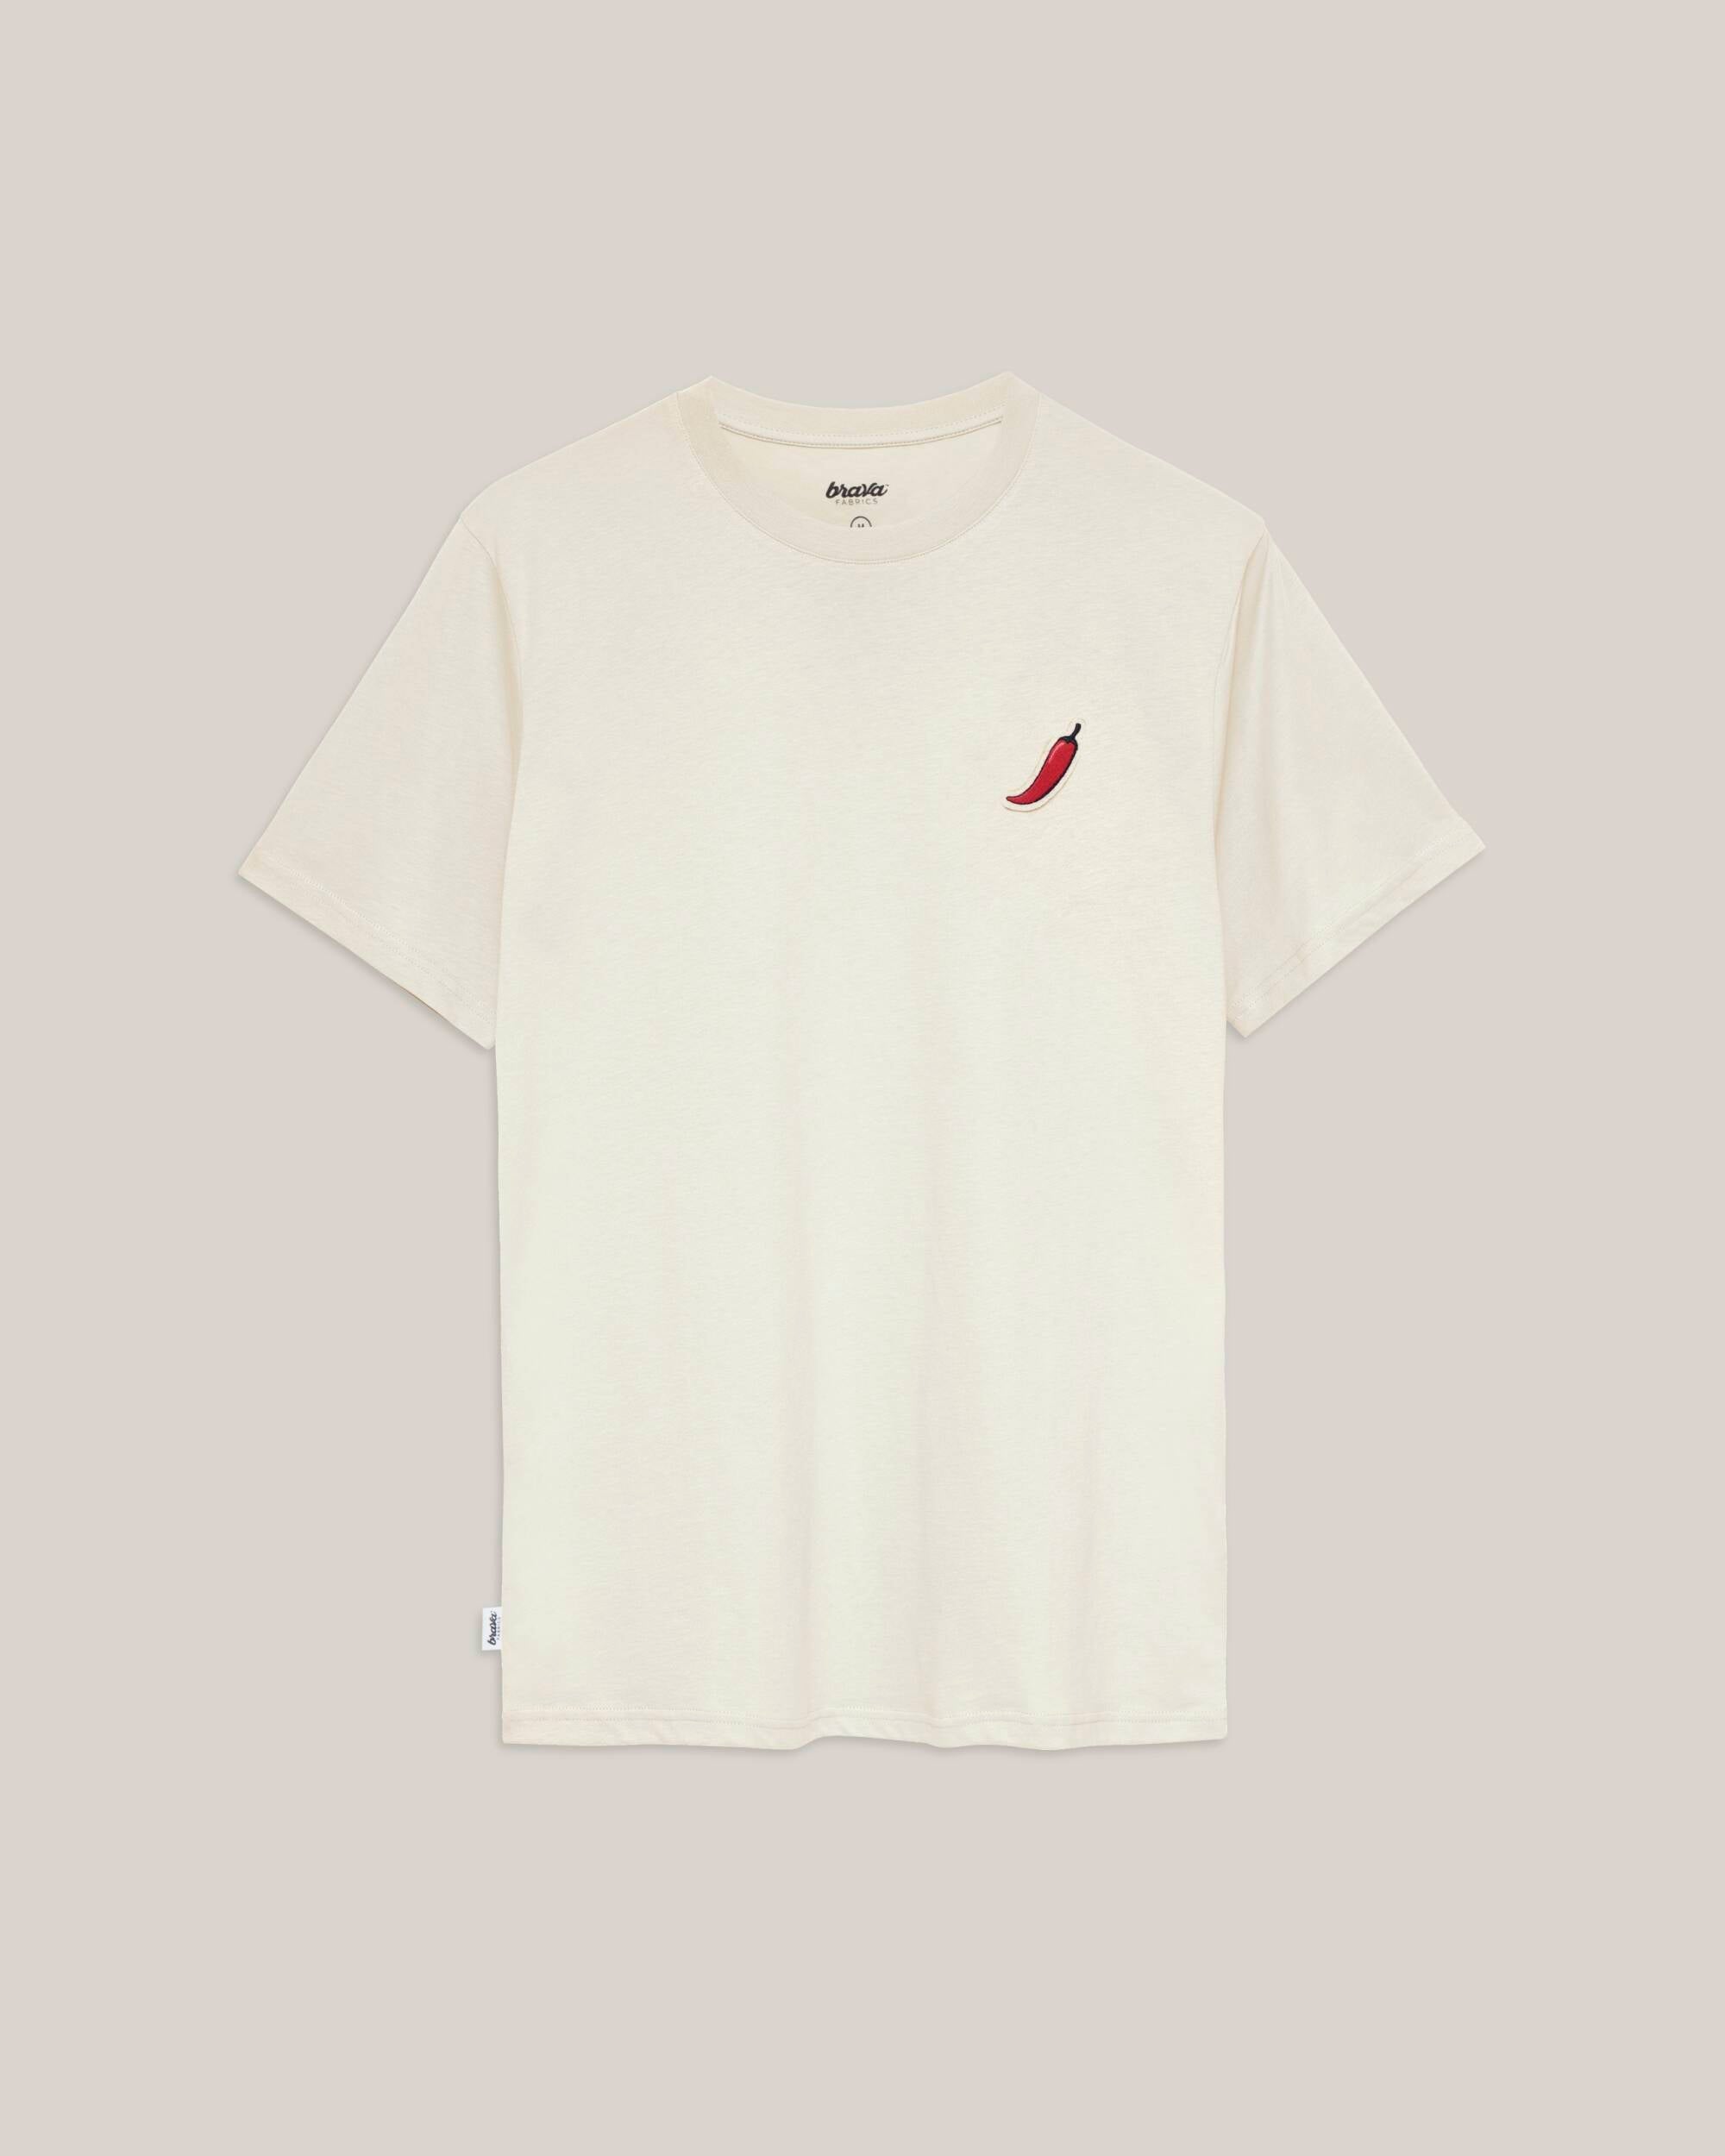 Beige T-shirt Red Chilli made from 100% organic cotton from Brava Fabrics